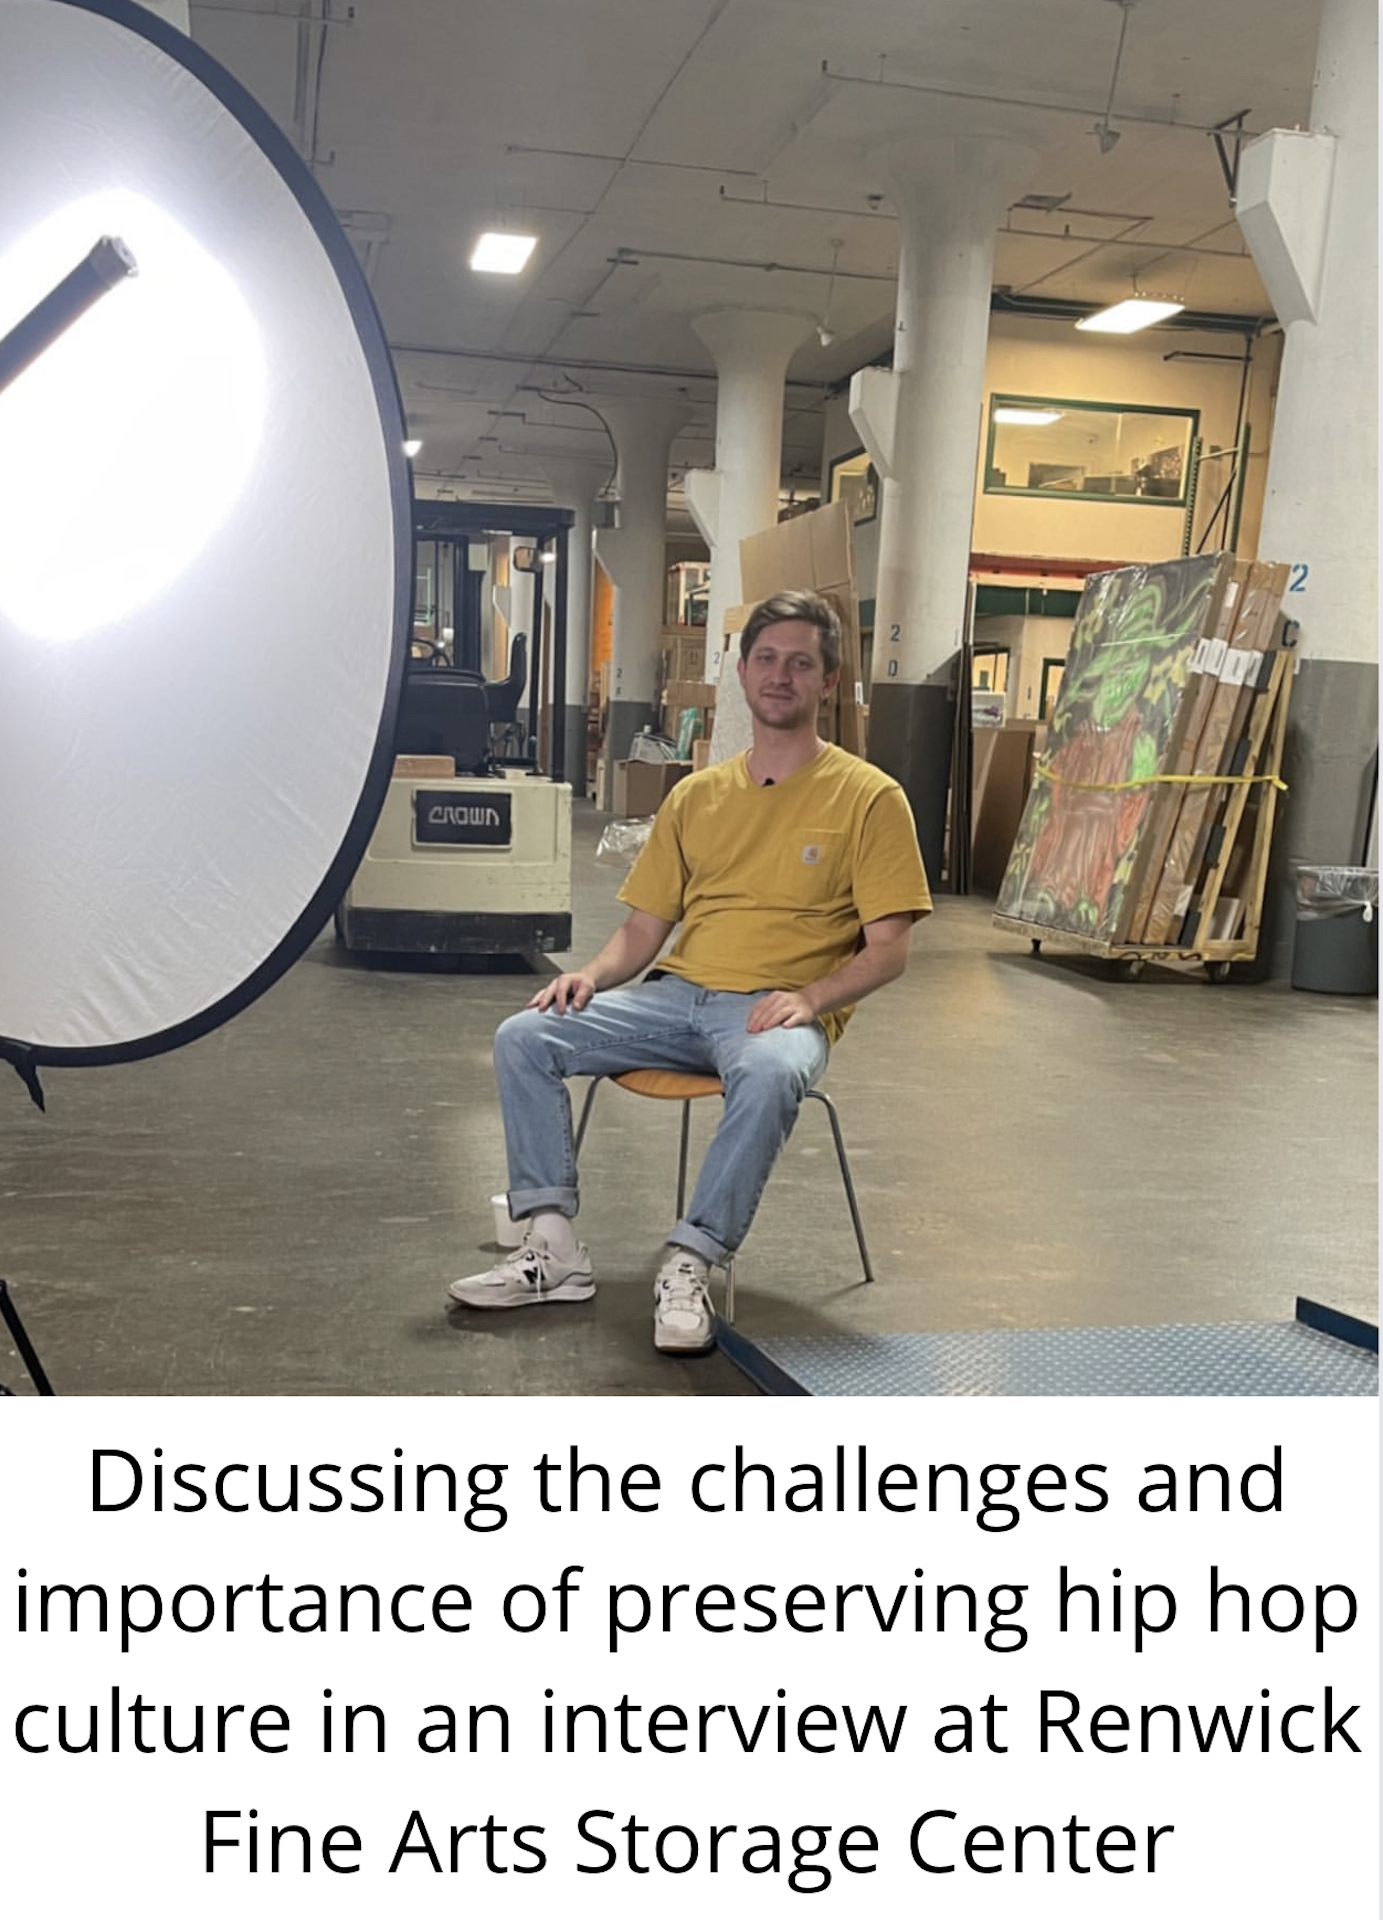 a figure is seated in a chair in the middle of a room facing the camera. The text below the image reads: "Discussing the challenges and importance of preserving hip hop culture in an interview at the Renwick Fine Arts Storage Center."